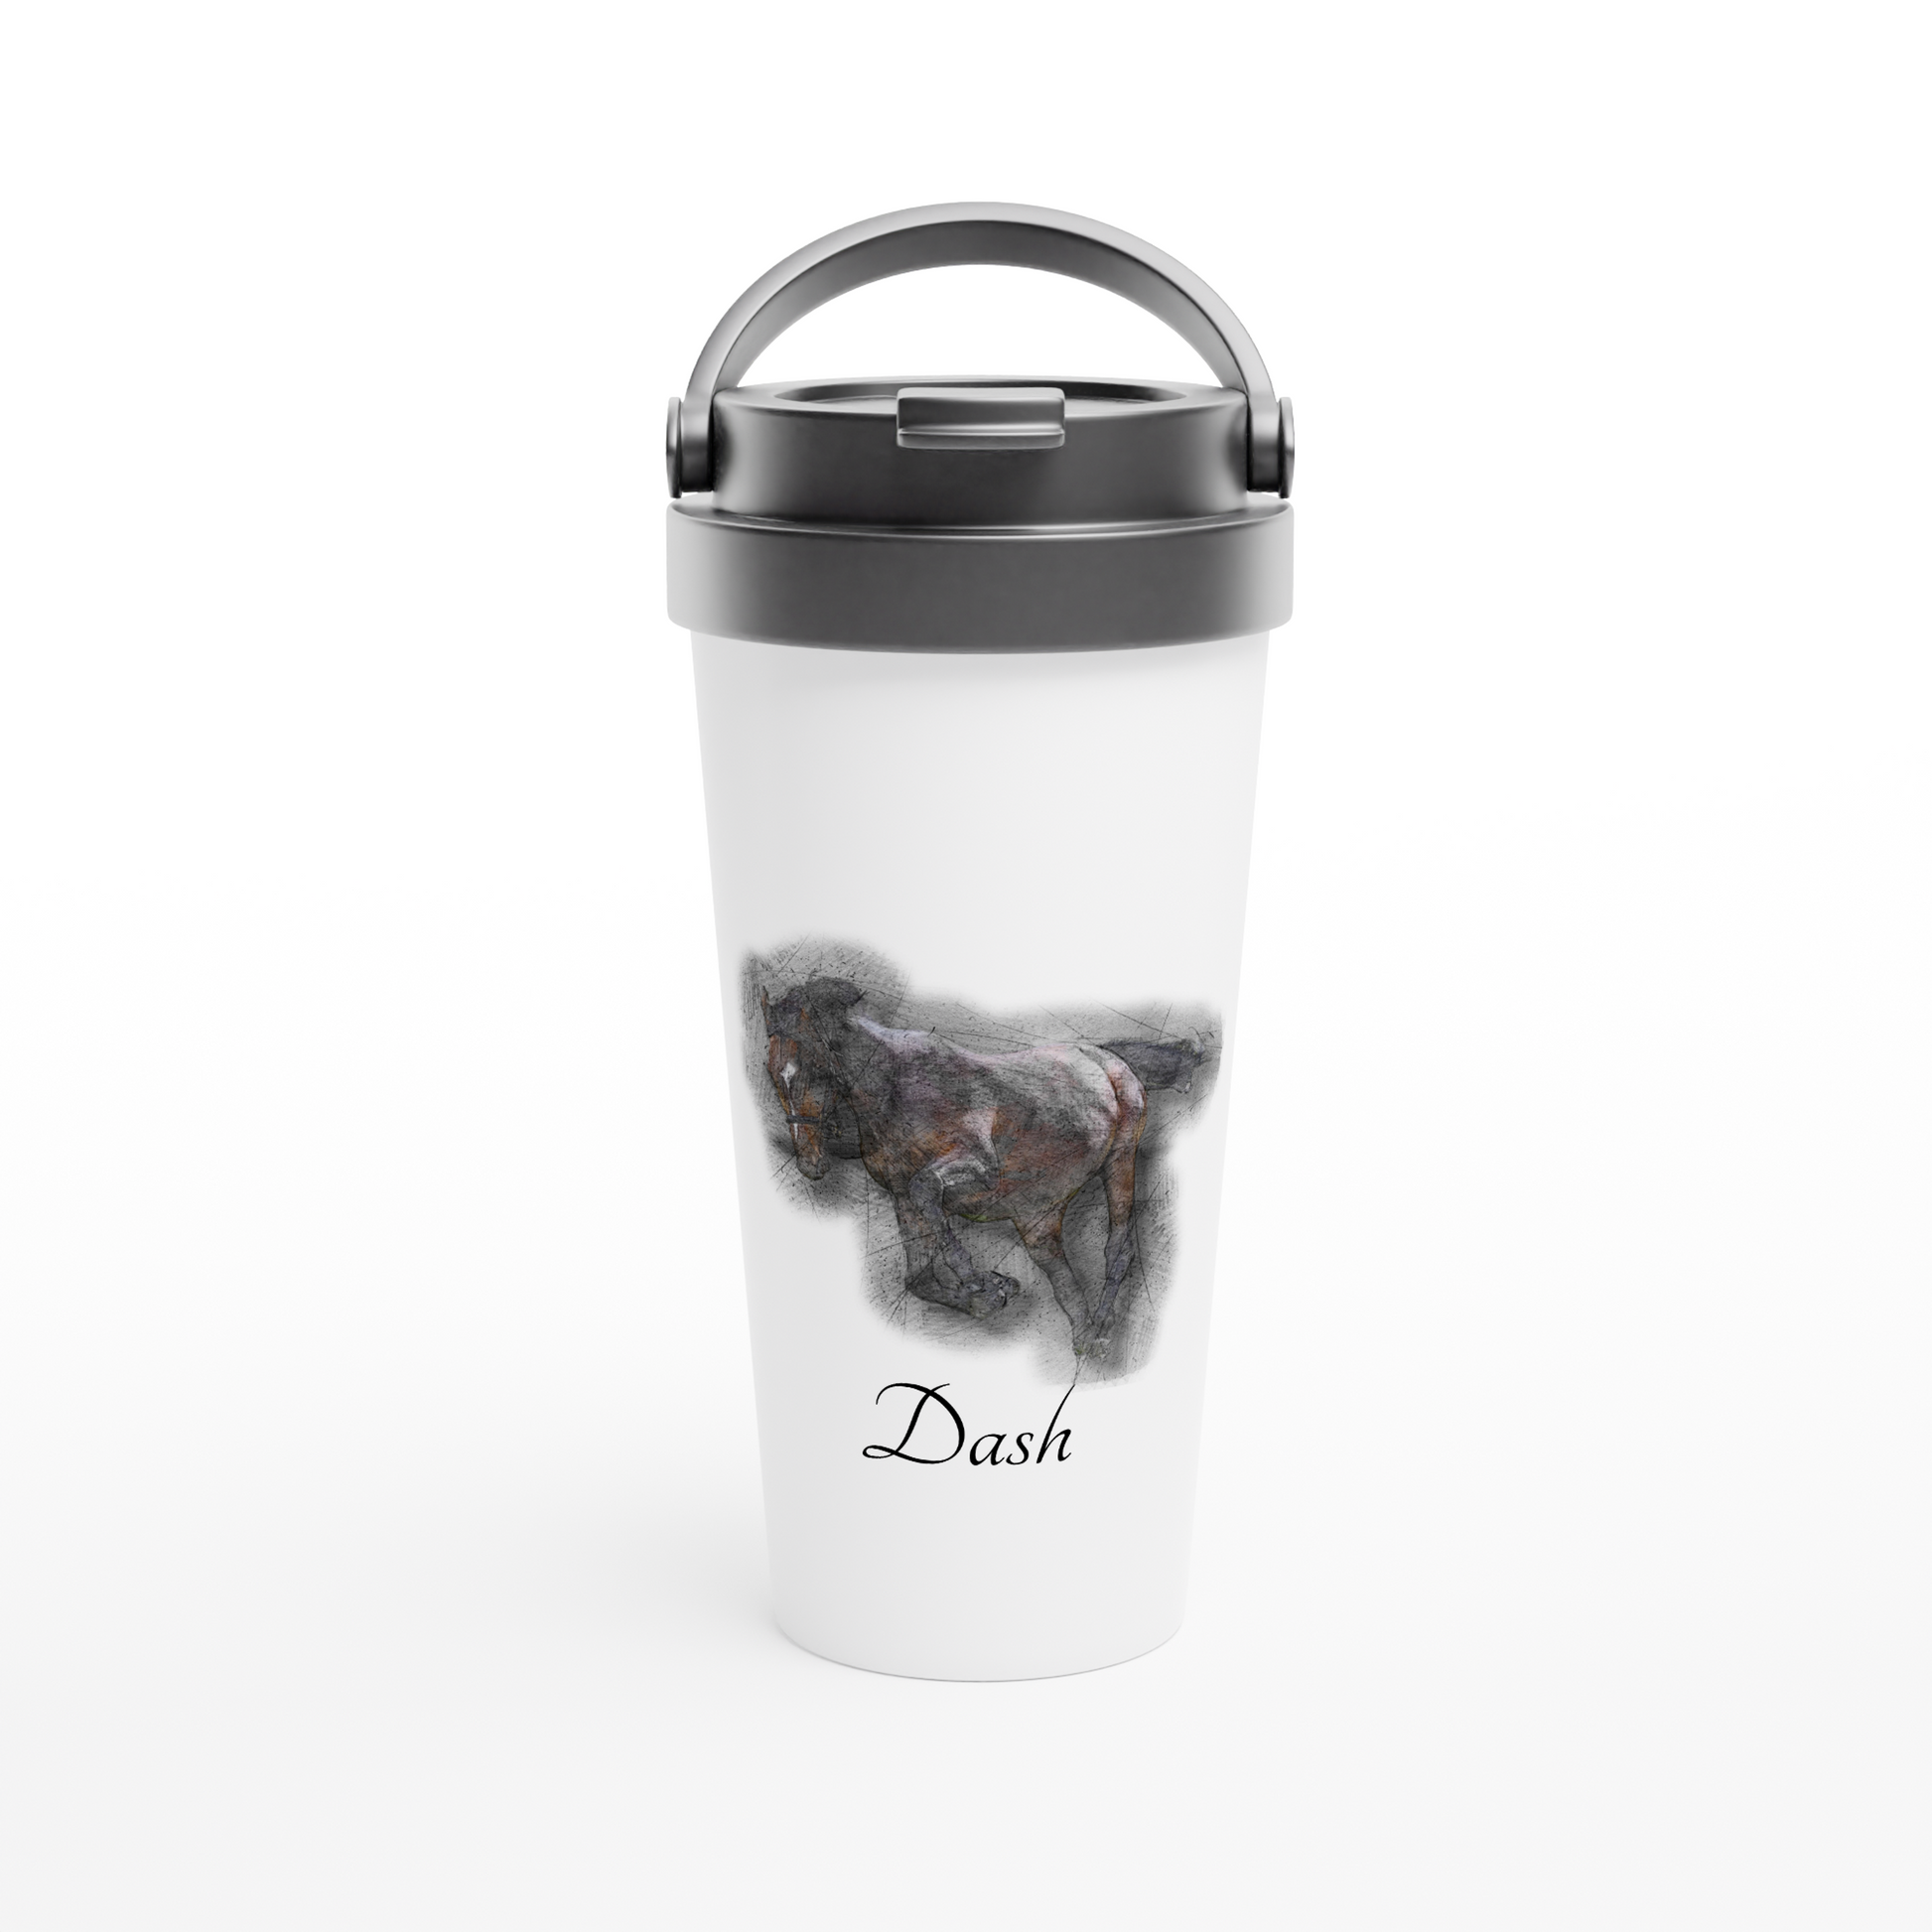 Hand Drawn Horse || 15oz Stainless Steel Travel Mug - Pencil Drawing - Personalized; Personalized with your horse